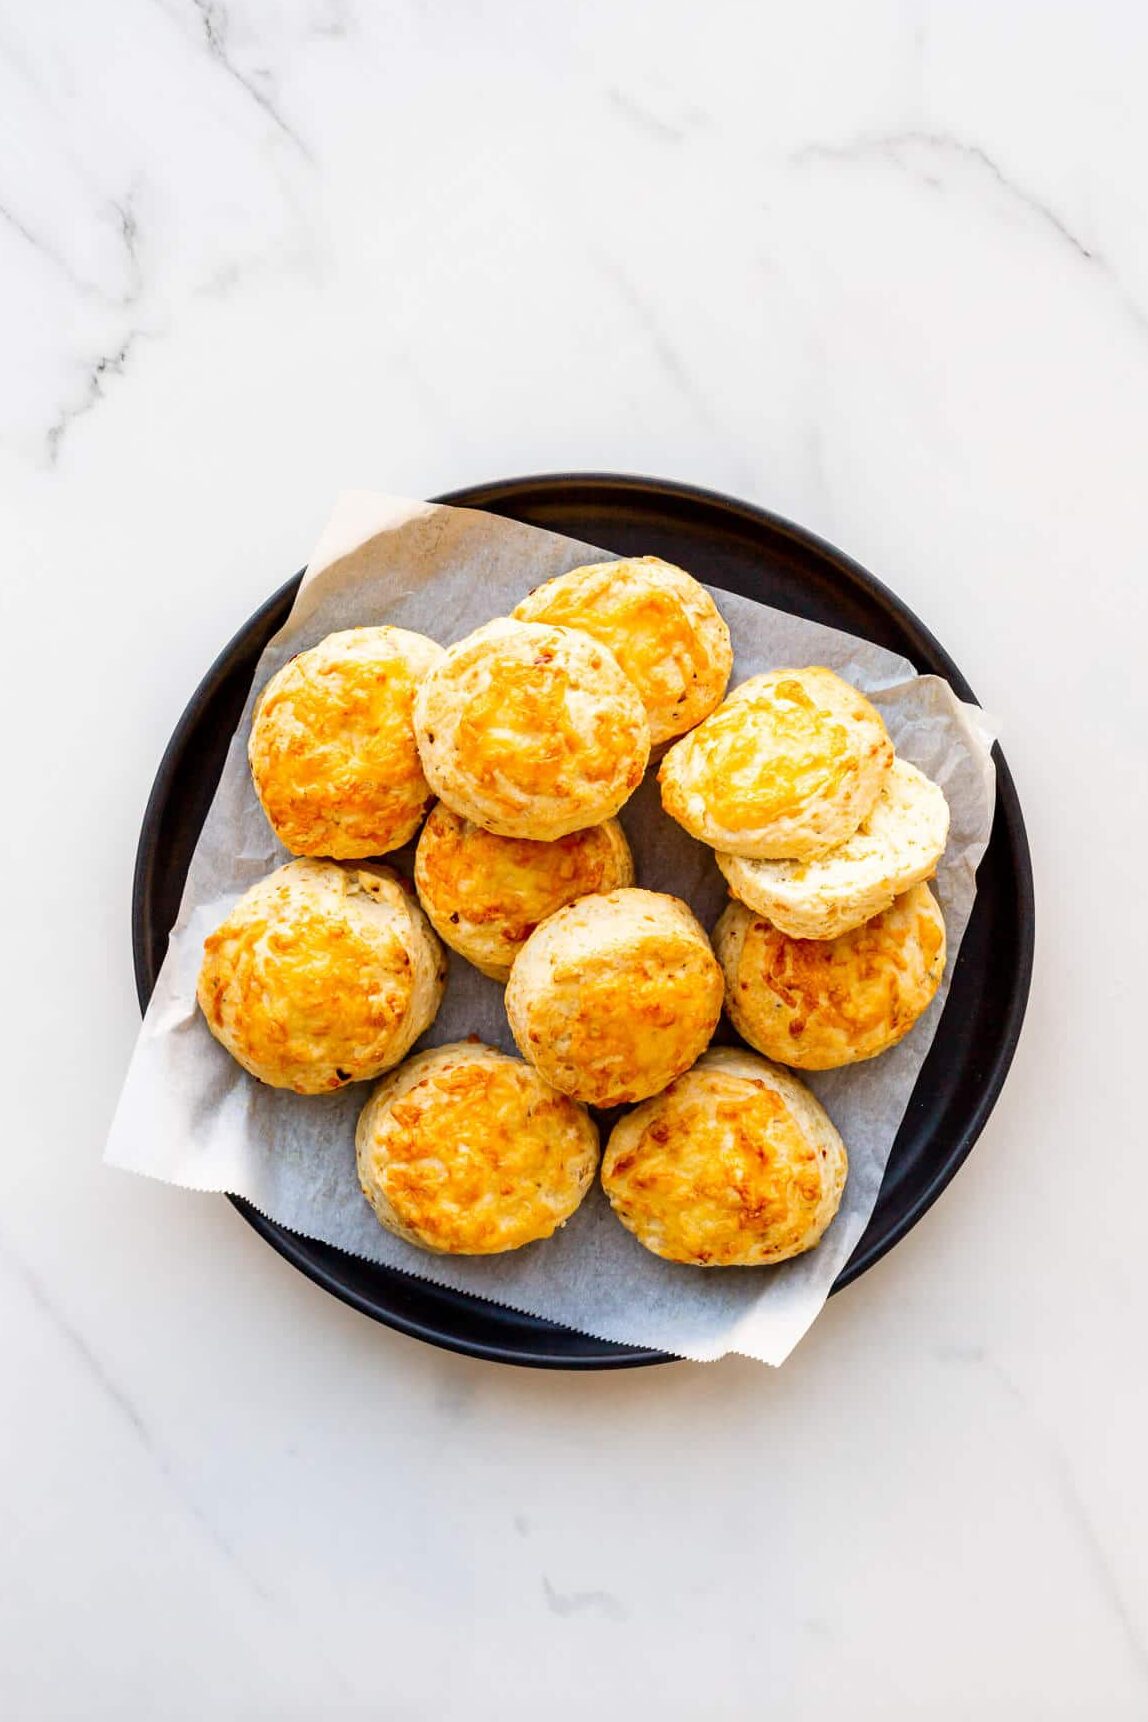 A plate of scones topped with melted cheese.